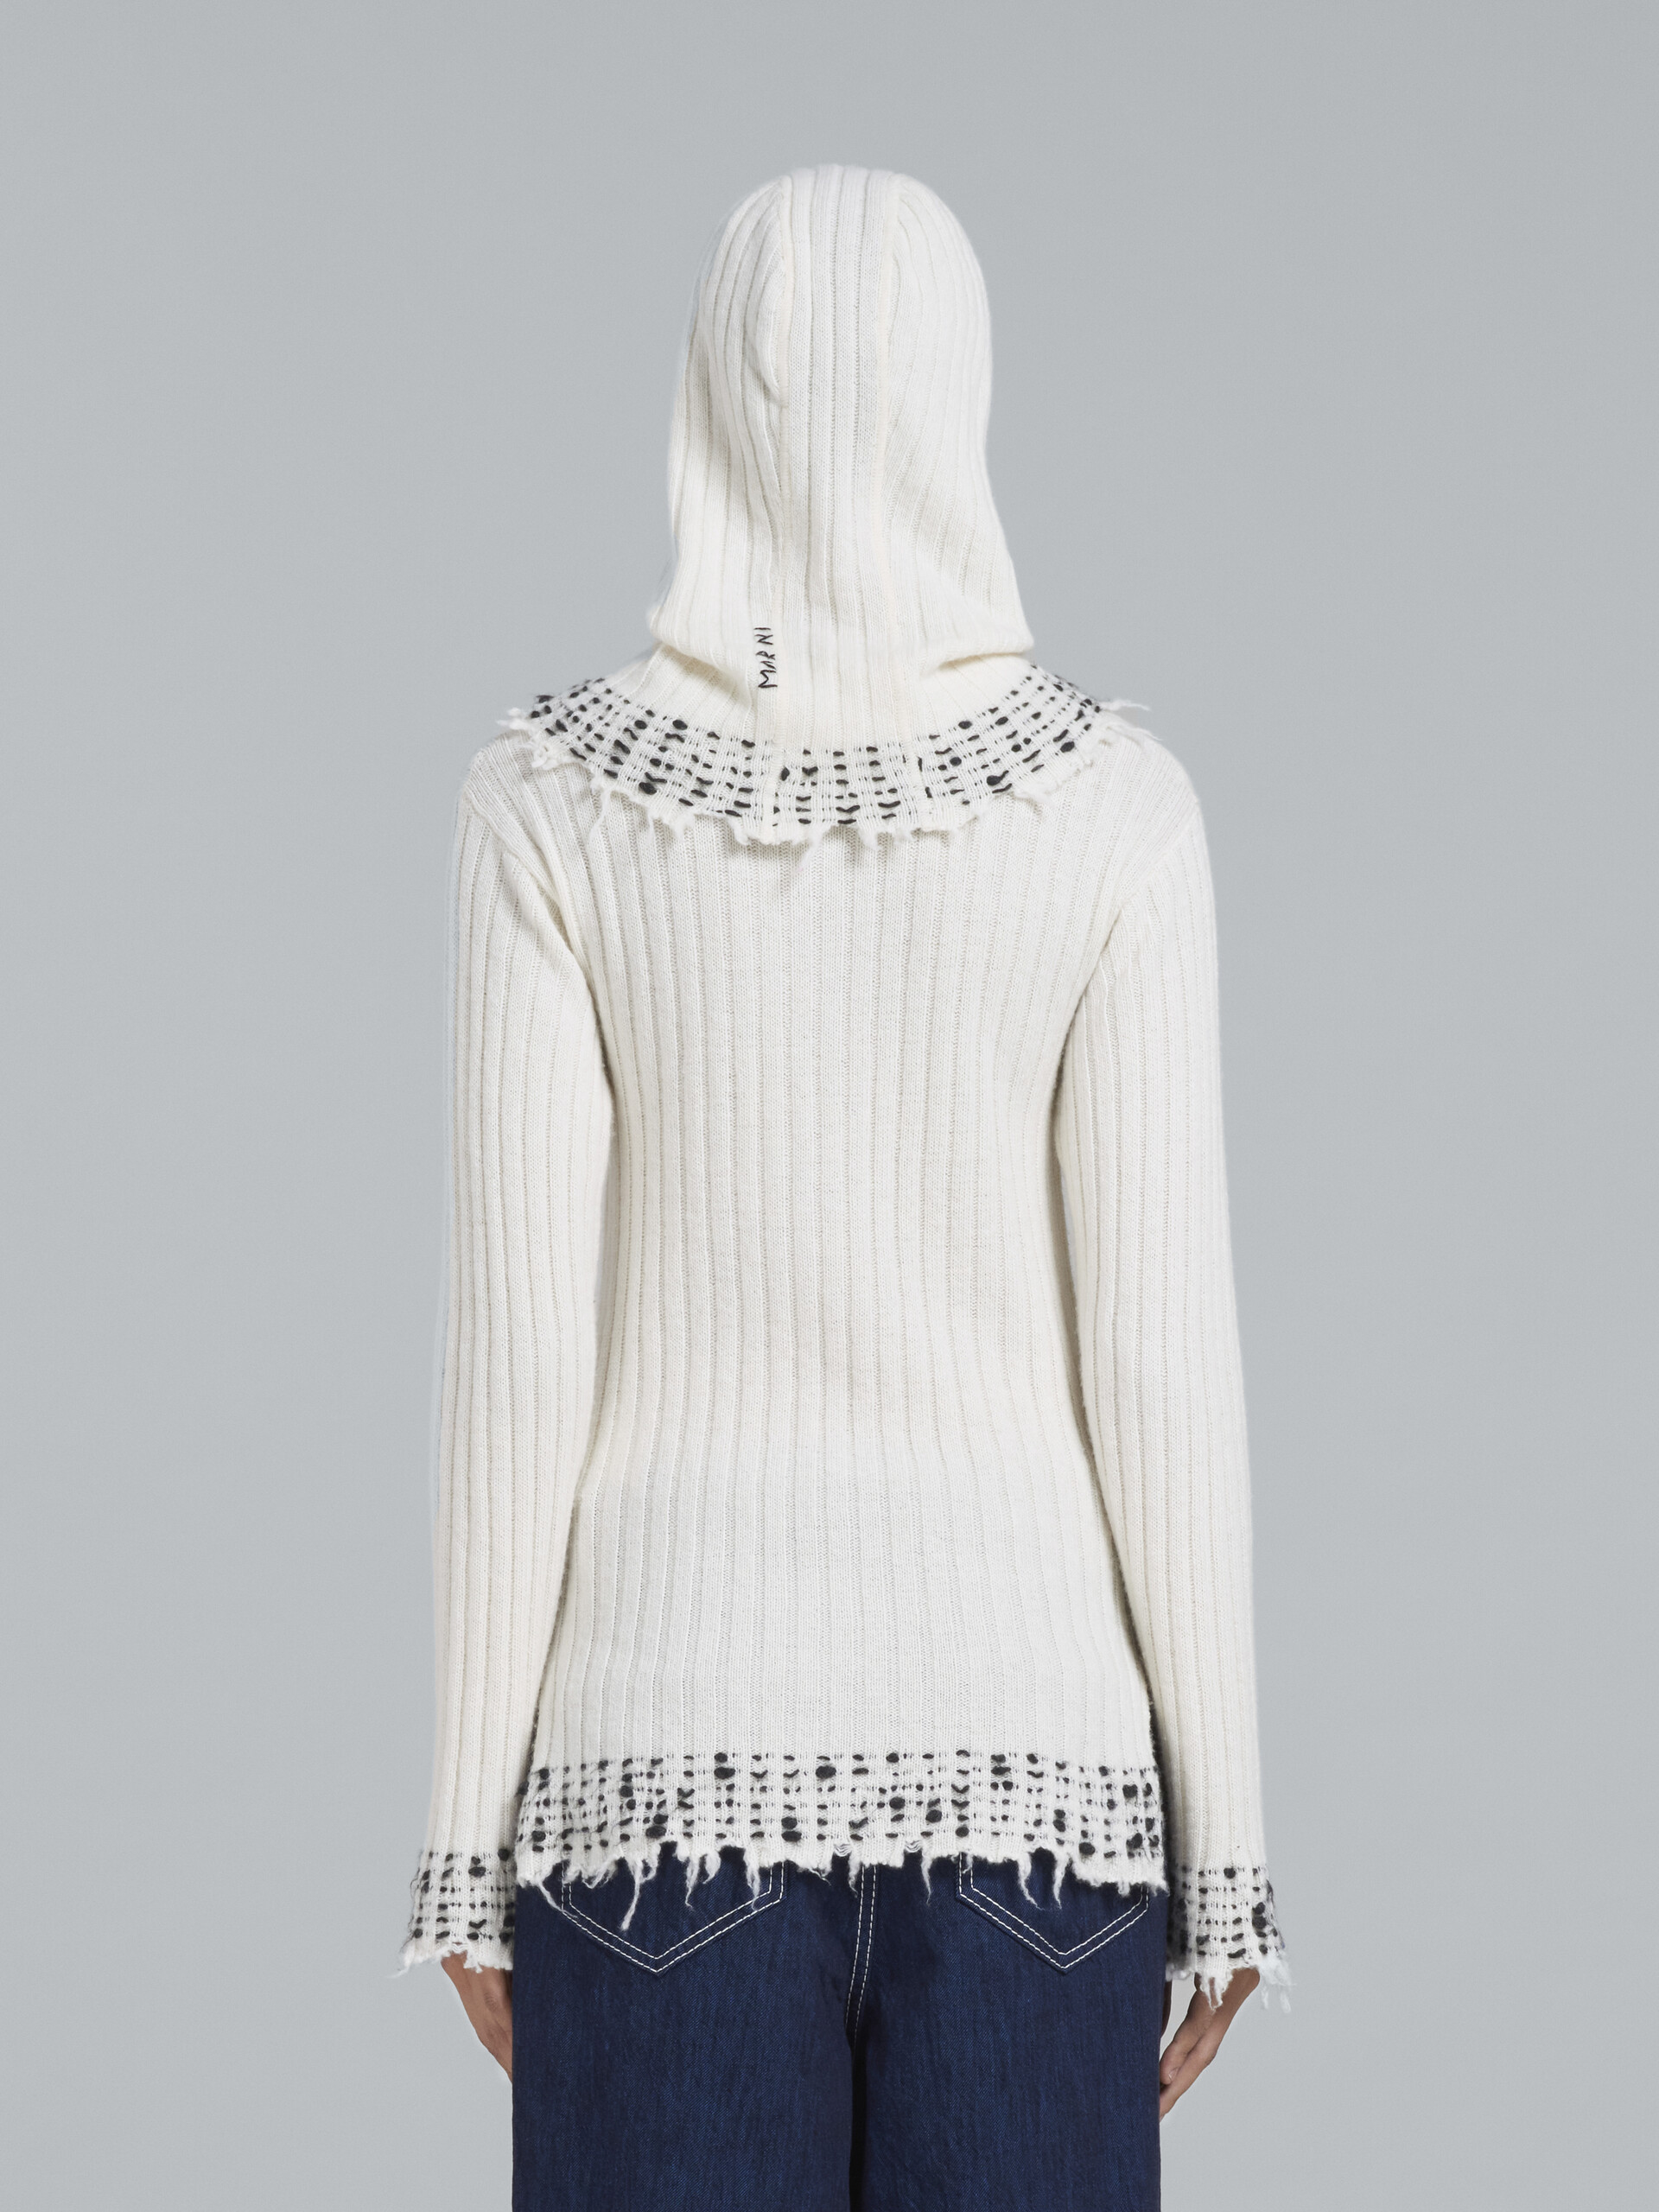 White knitted wool sweater - Pullovers - Image 3